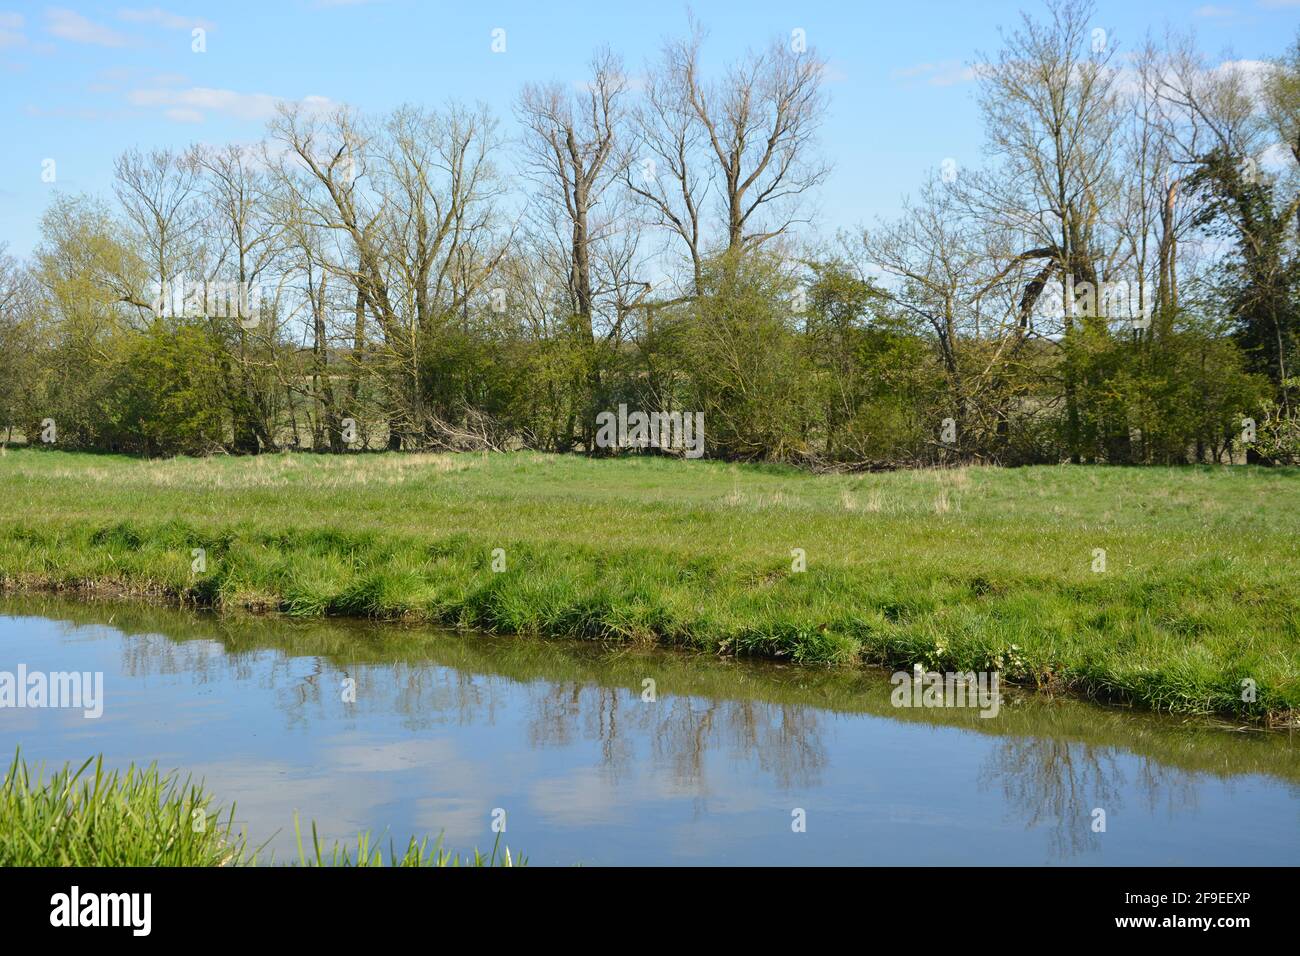 Anglesey Abbey Cambridge UK,  Avenue tree beautiful blue sky background landscape with the river water mirror reflection High Resolution,Stock Photo Stock Photo